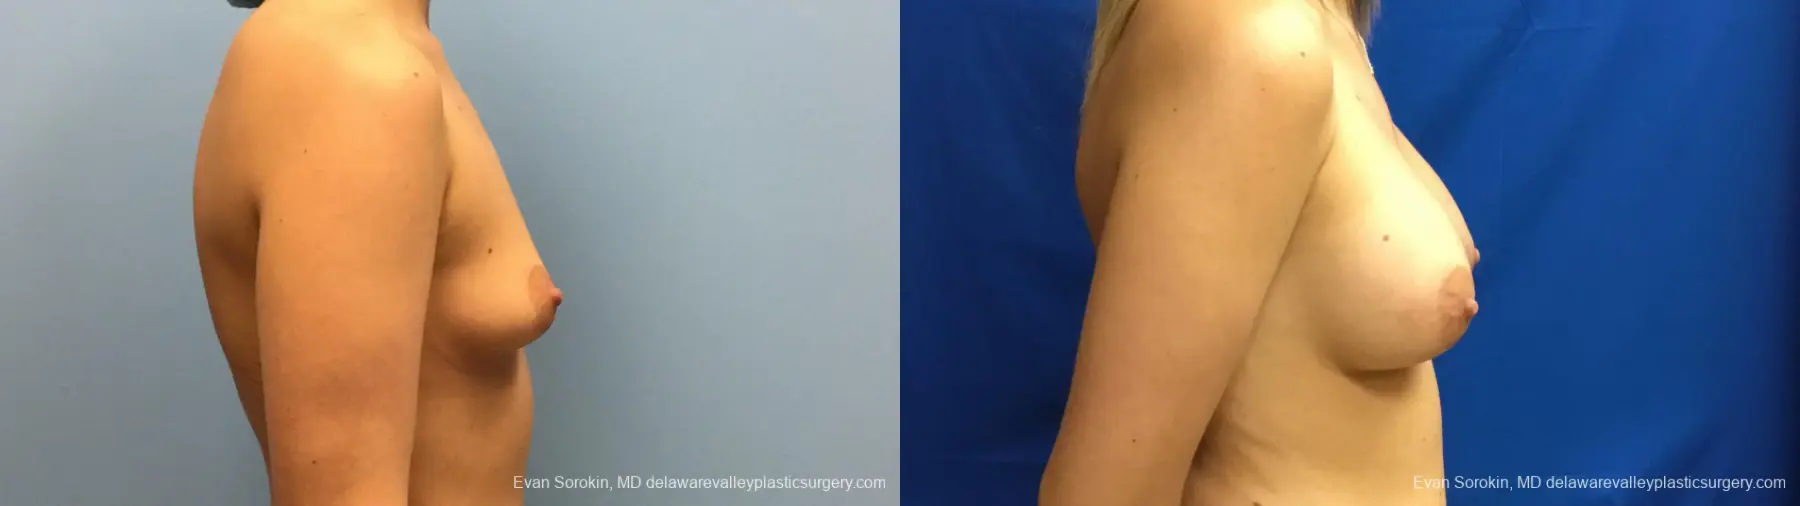 Philadelphia Breast Augmentation 12540 - Before and After 4